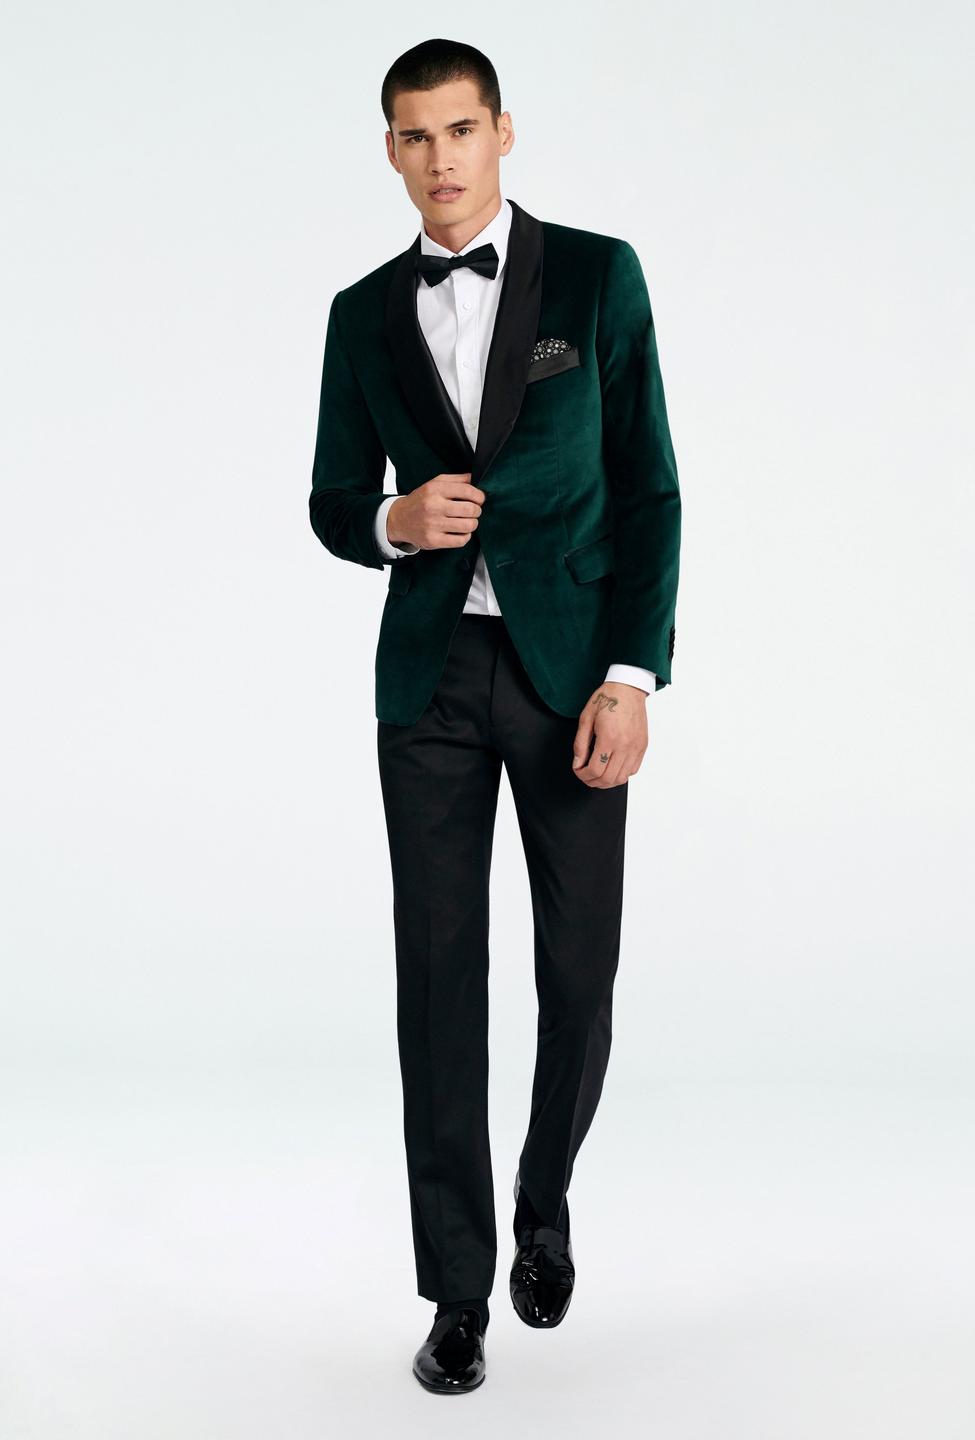 Green blazer - Hardford Solid Design from Tuxedo Indochino Collection